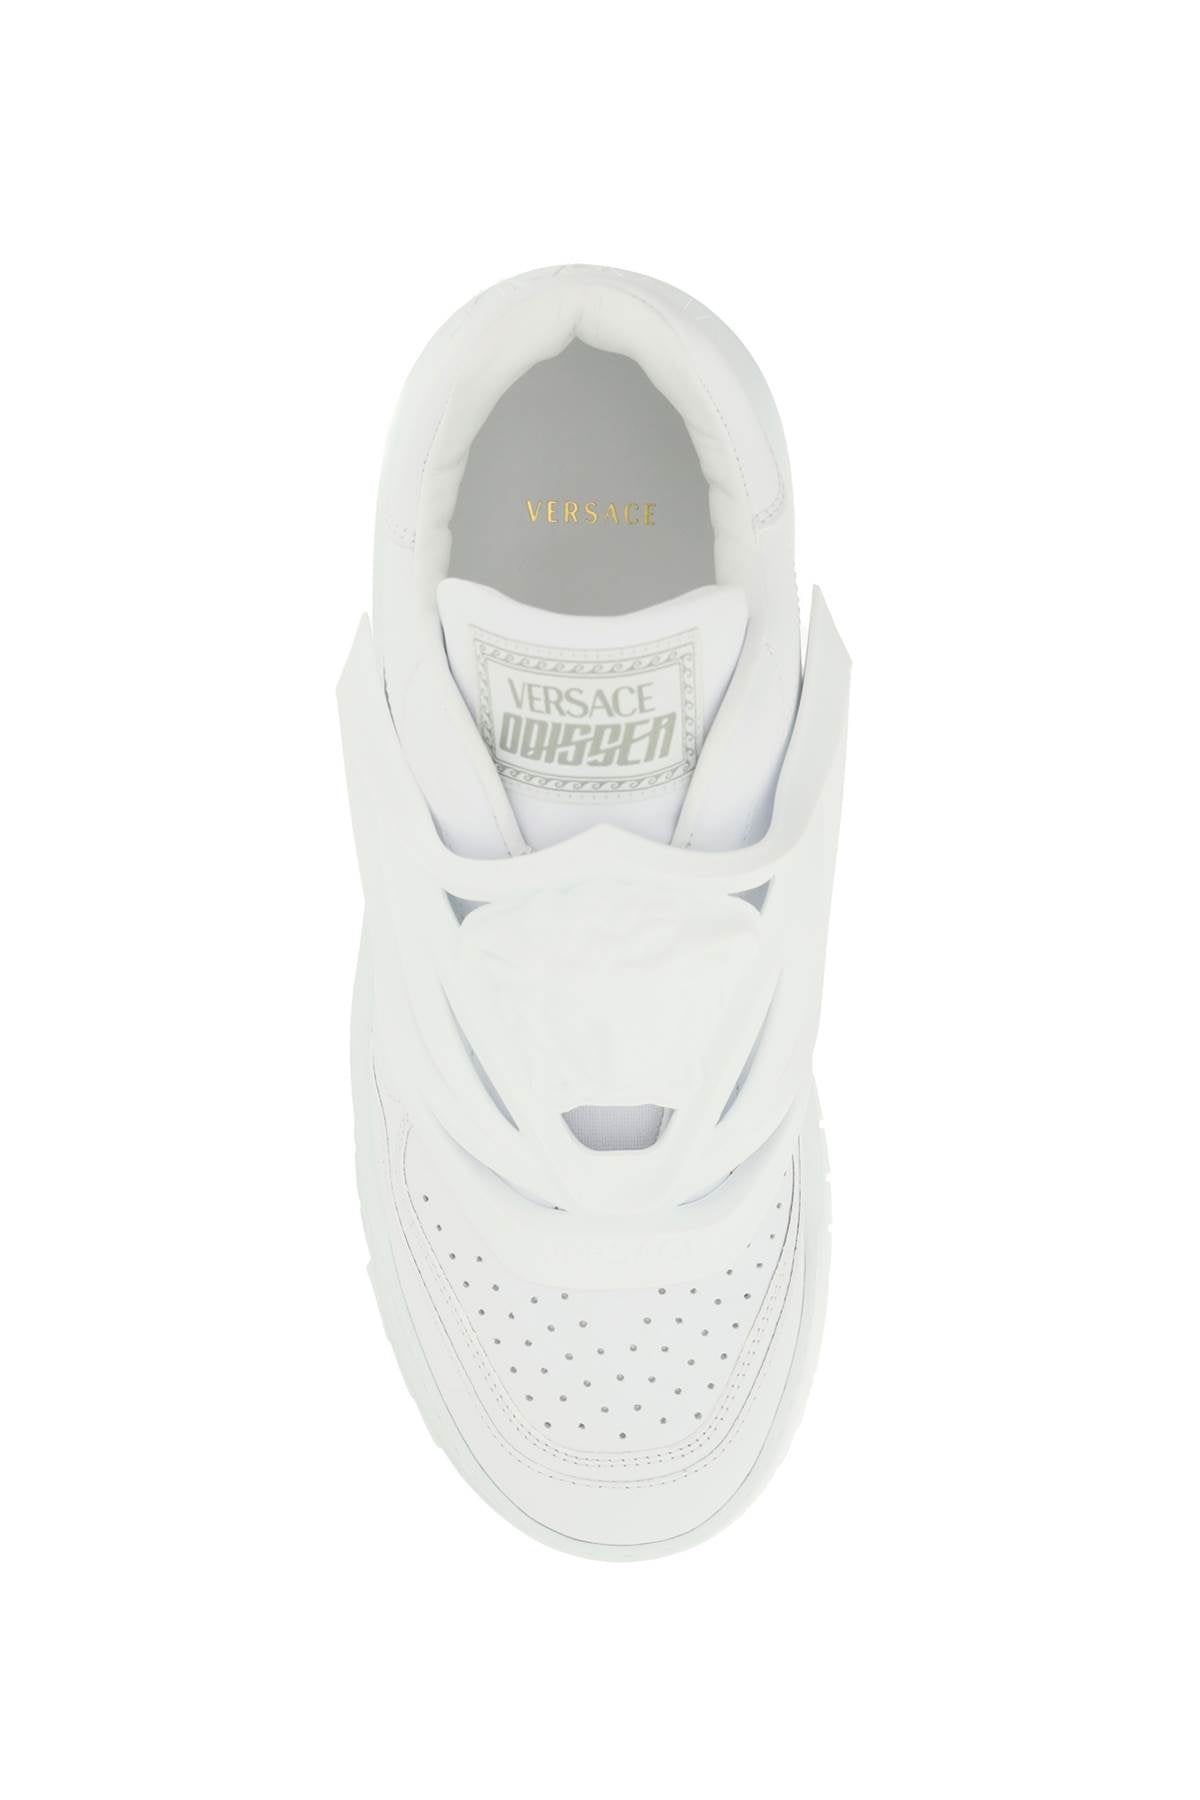 VERSACE White Leather Slip-On Sneakers for Men | Perforated Toe Caps & Medusa Detail